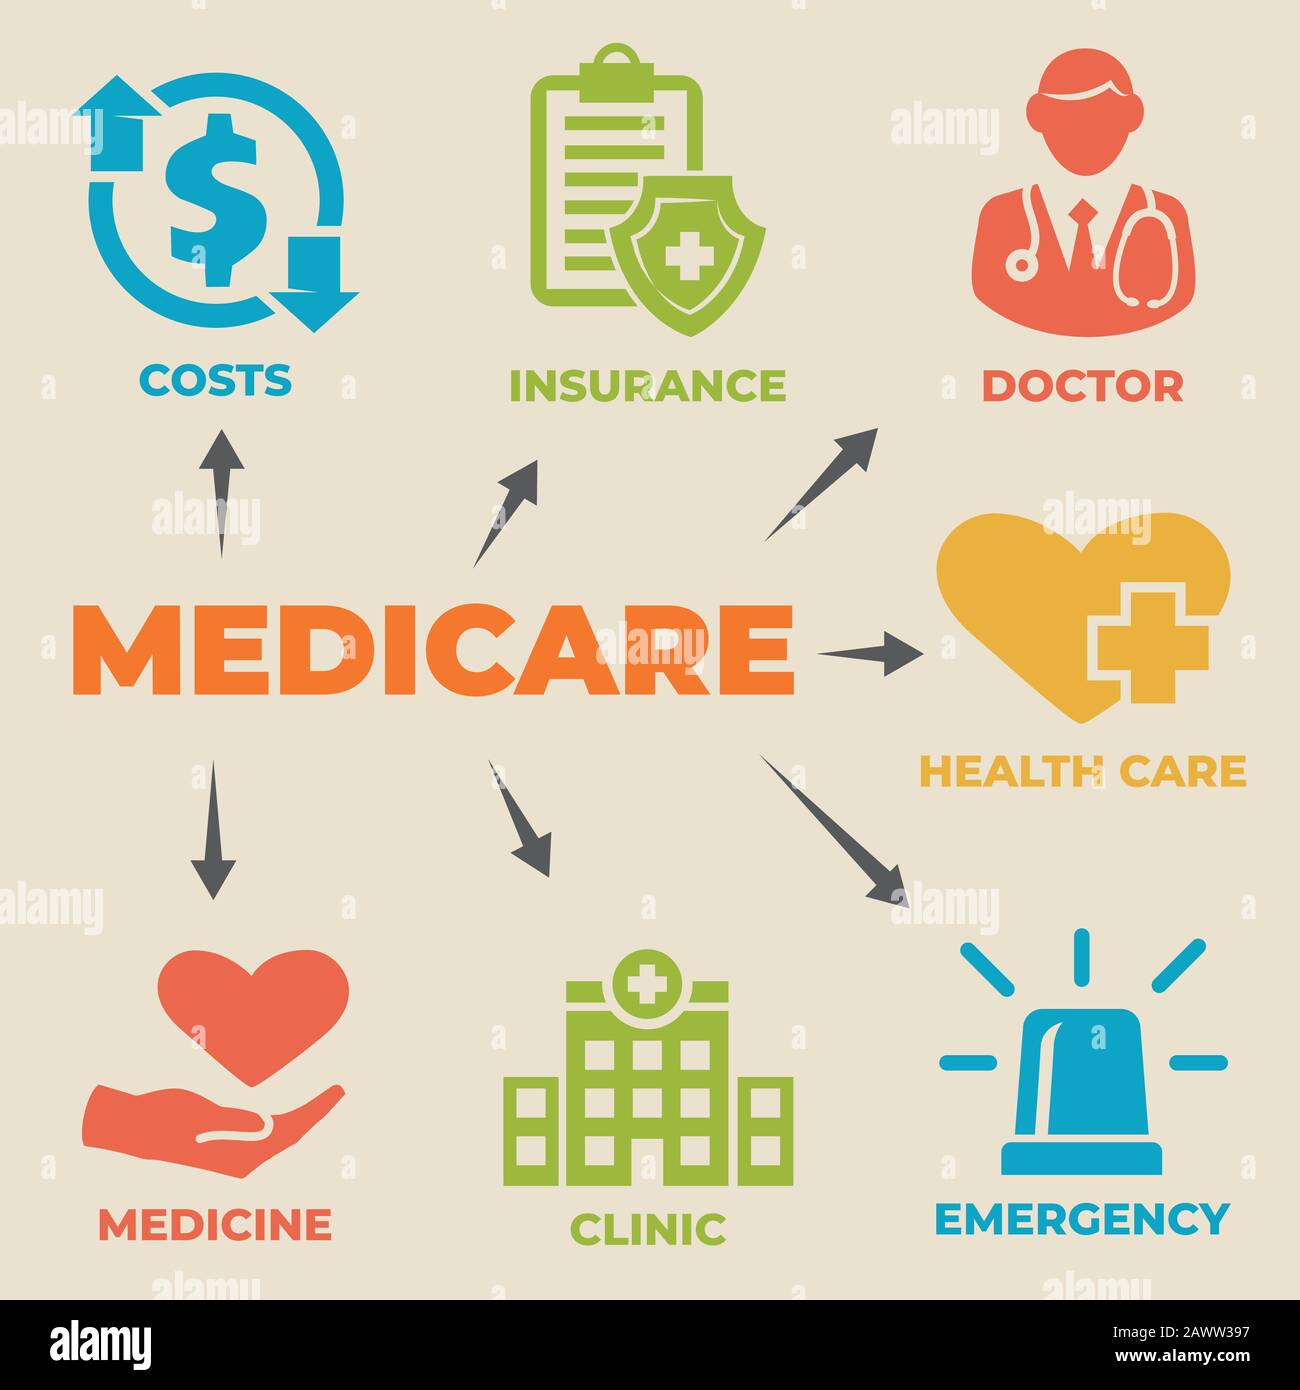 MEDICARE Concept with icons and signs Stock Vector